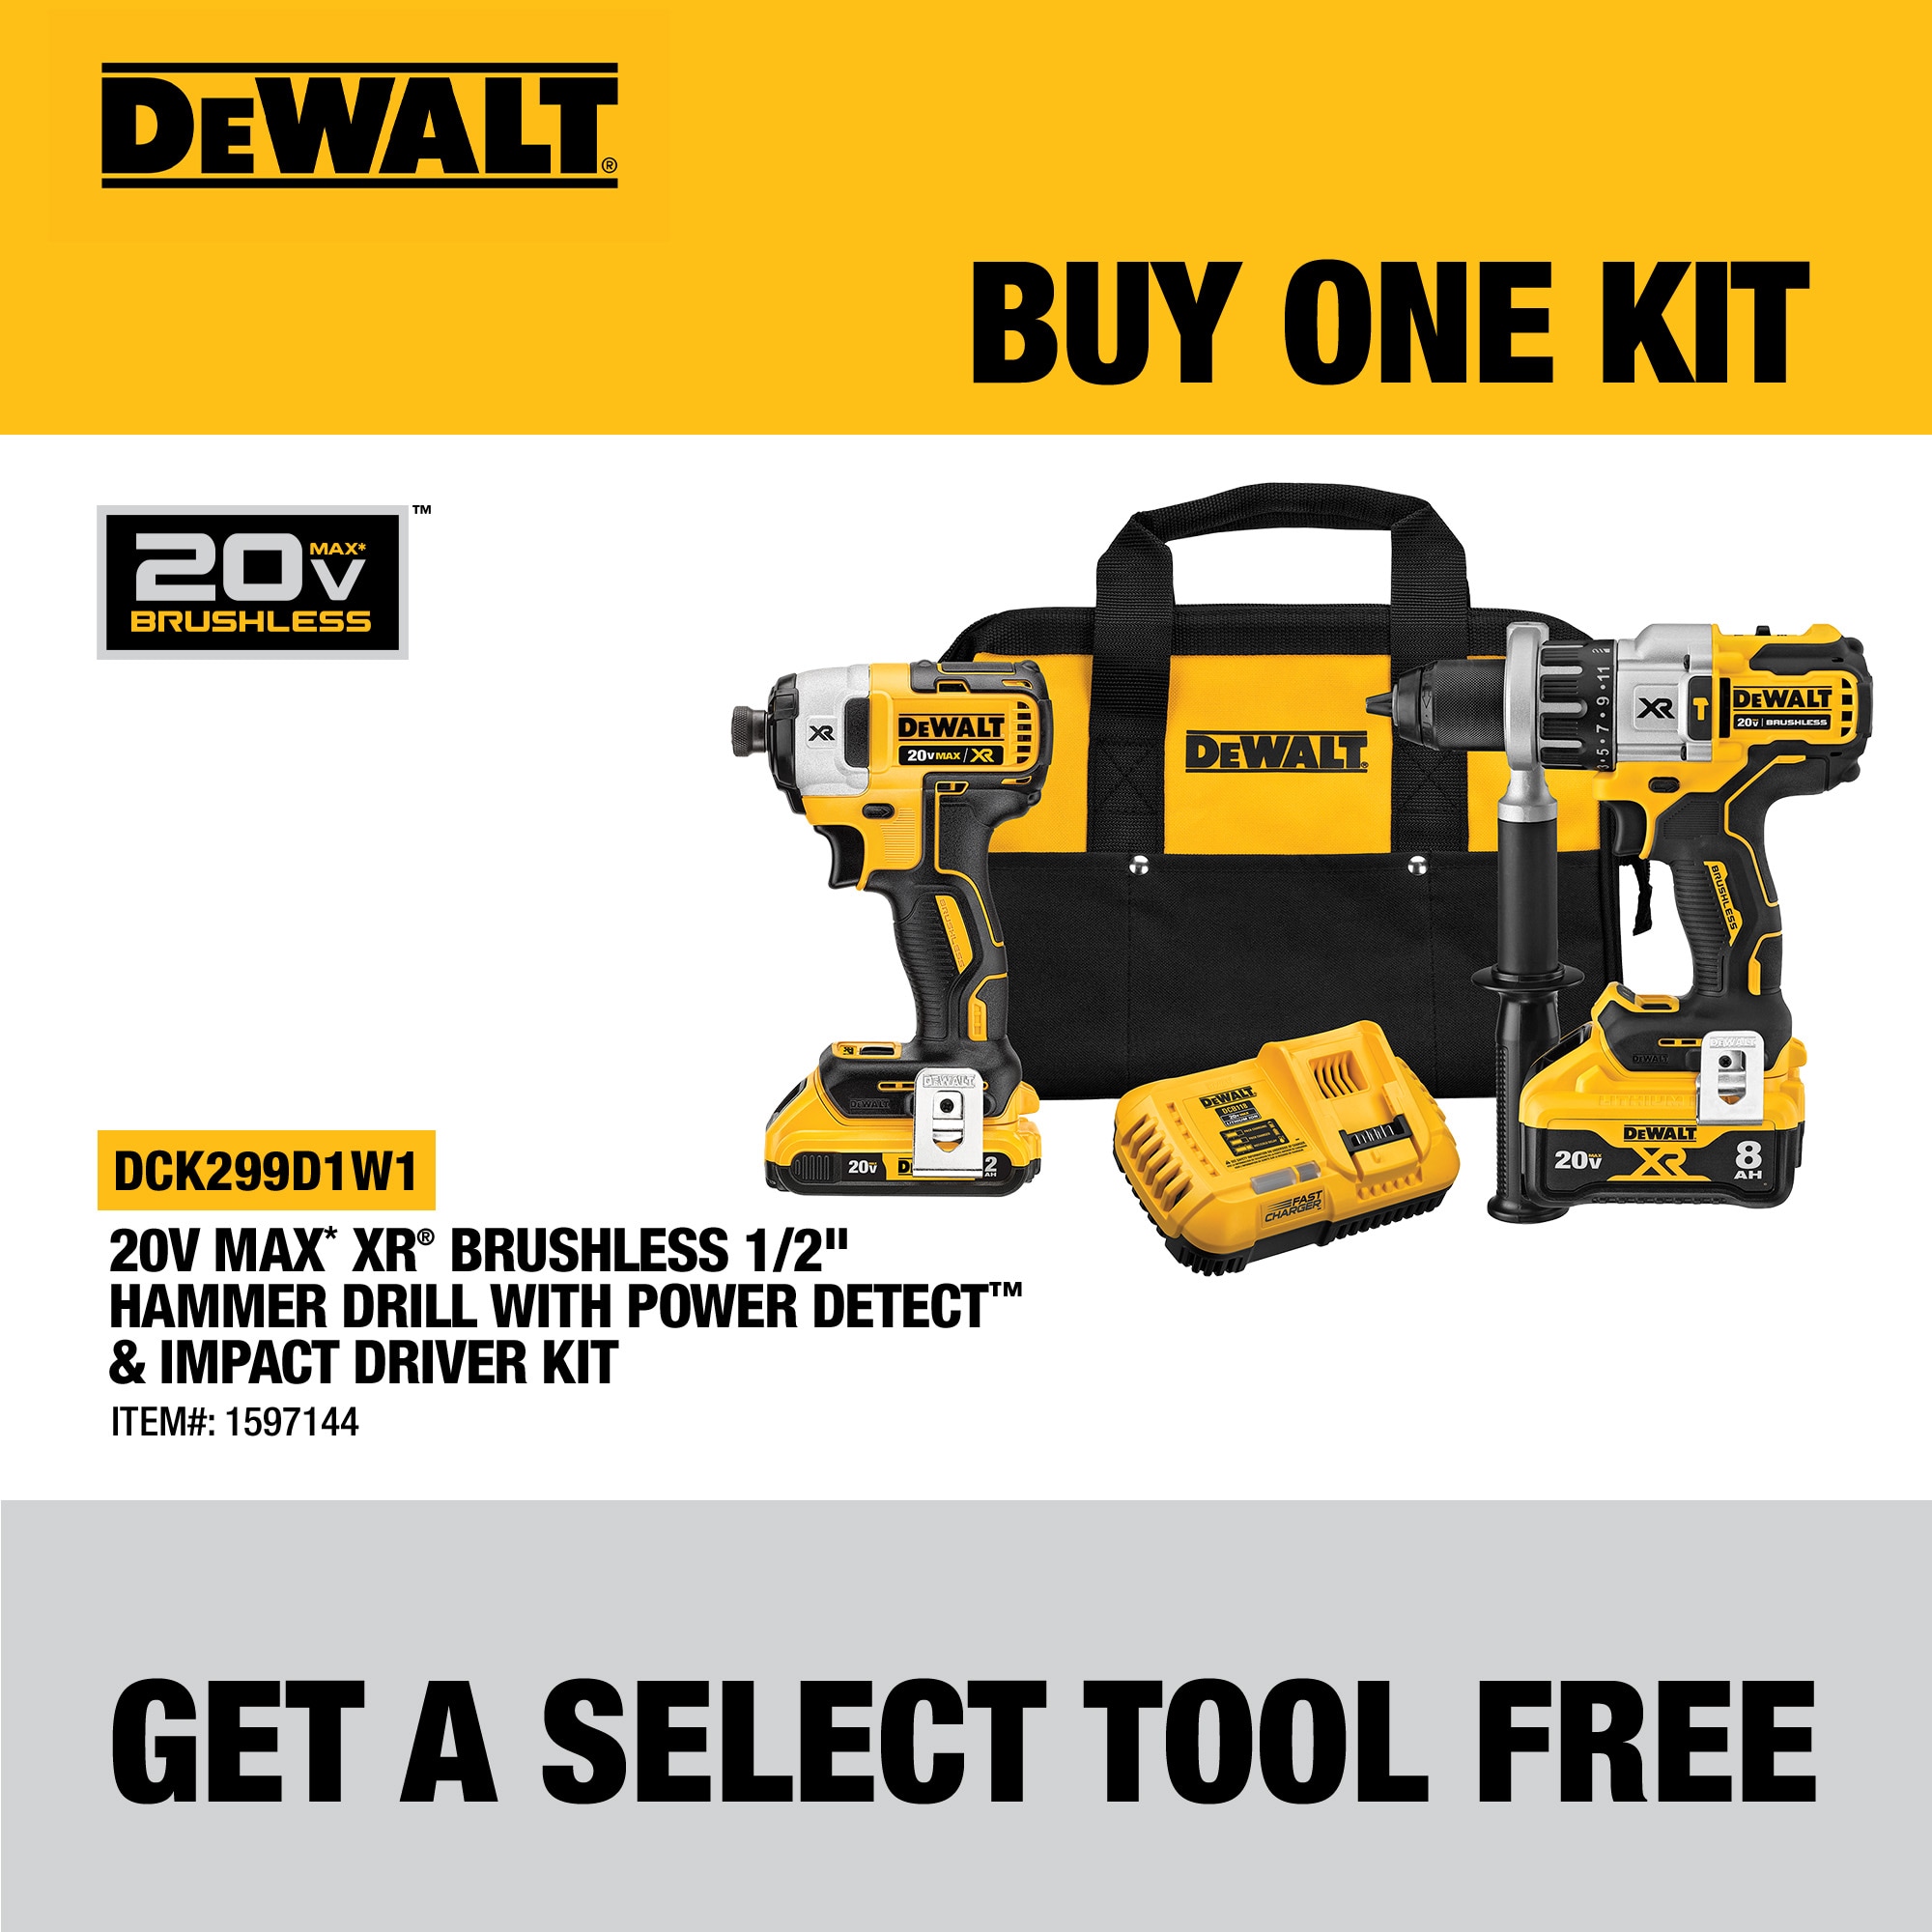 ON SALE - Power Tool Deals and Promotions